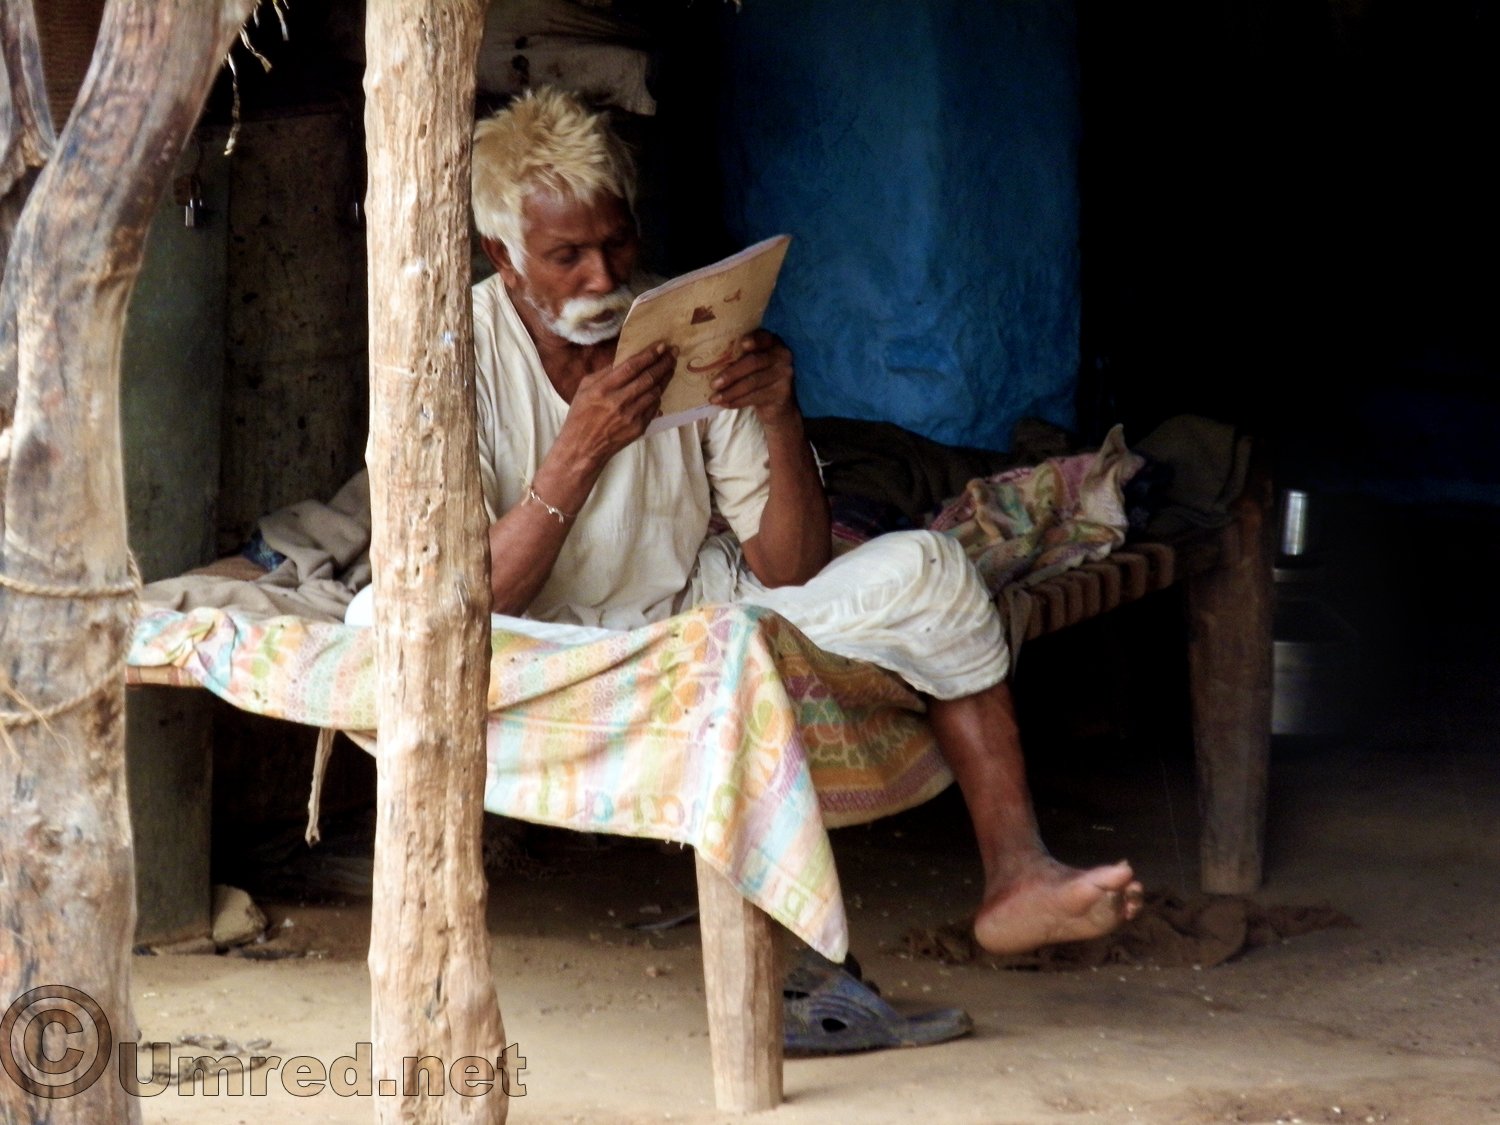 Peace, quiet and some reading time in rural India